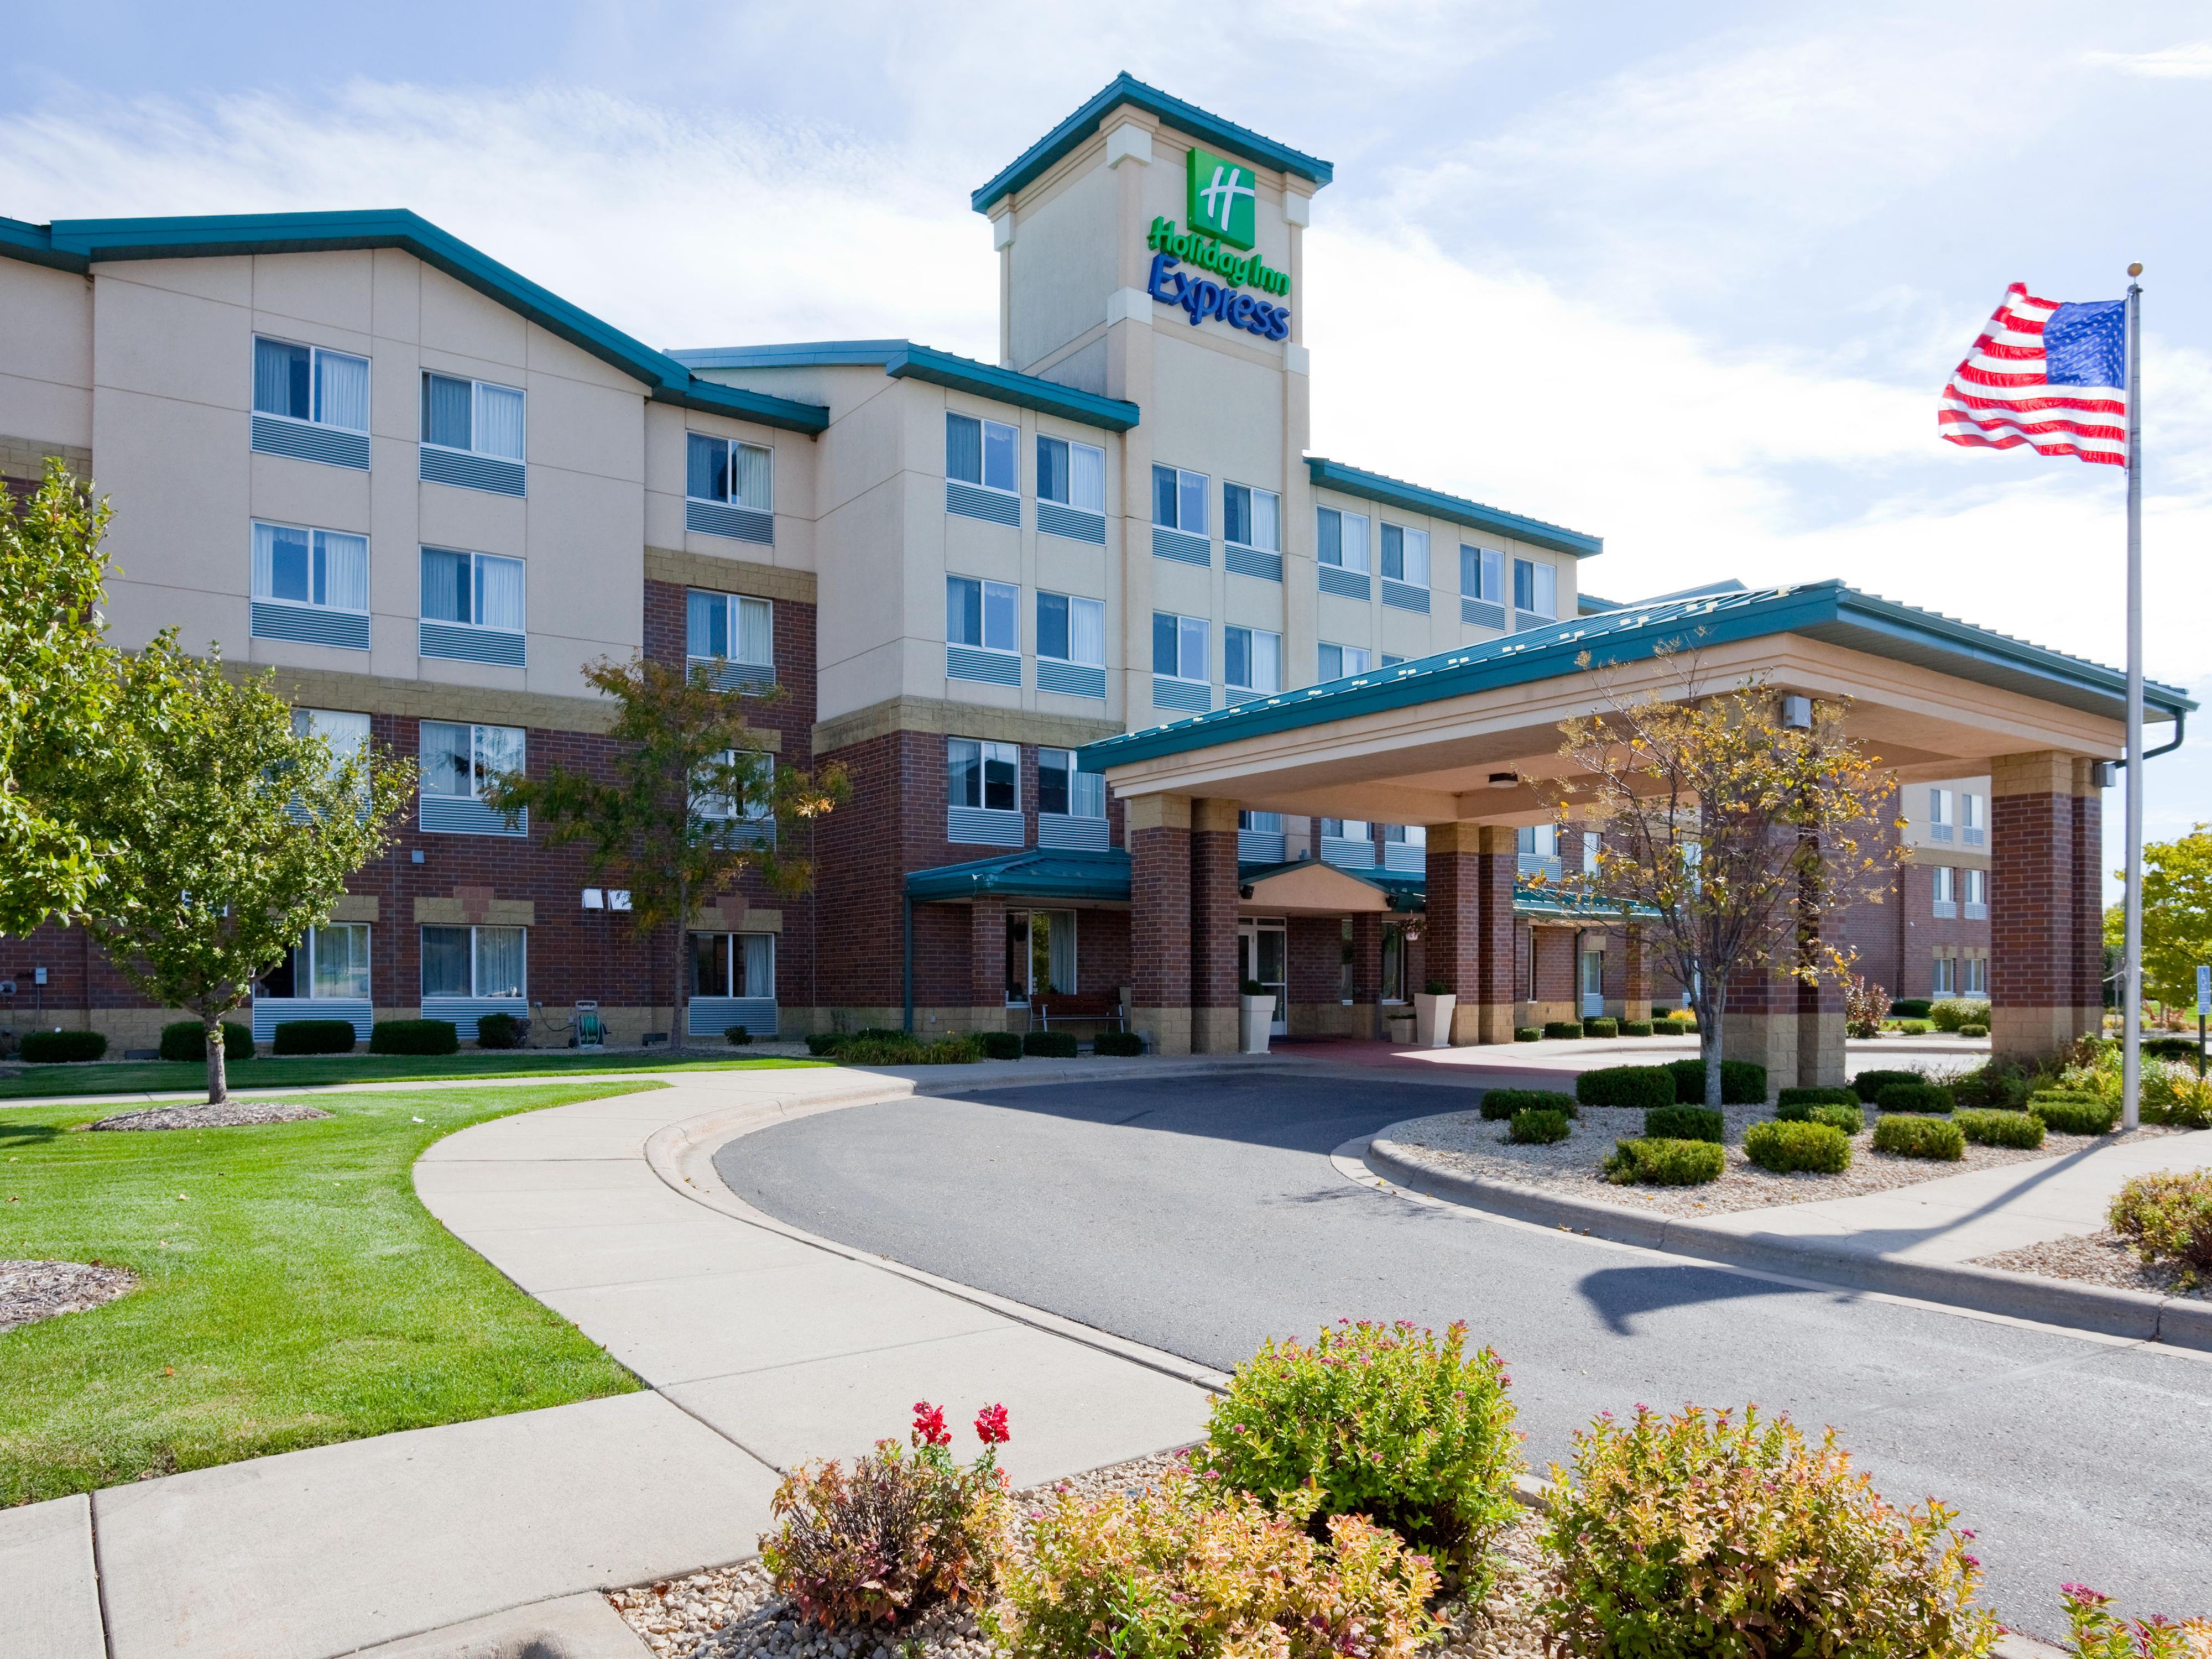 Holiday Inn St Paul Family Hotels Kid Friendly Hotels In St